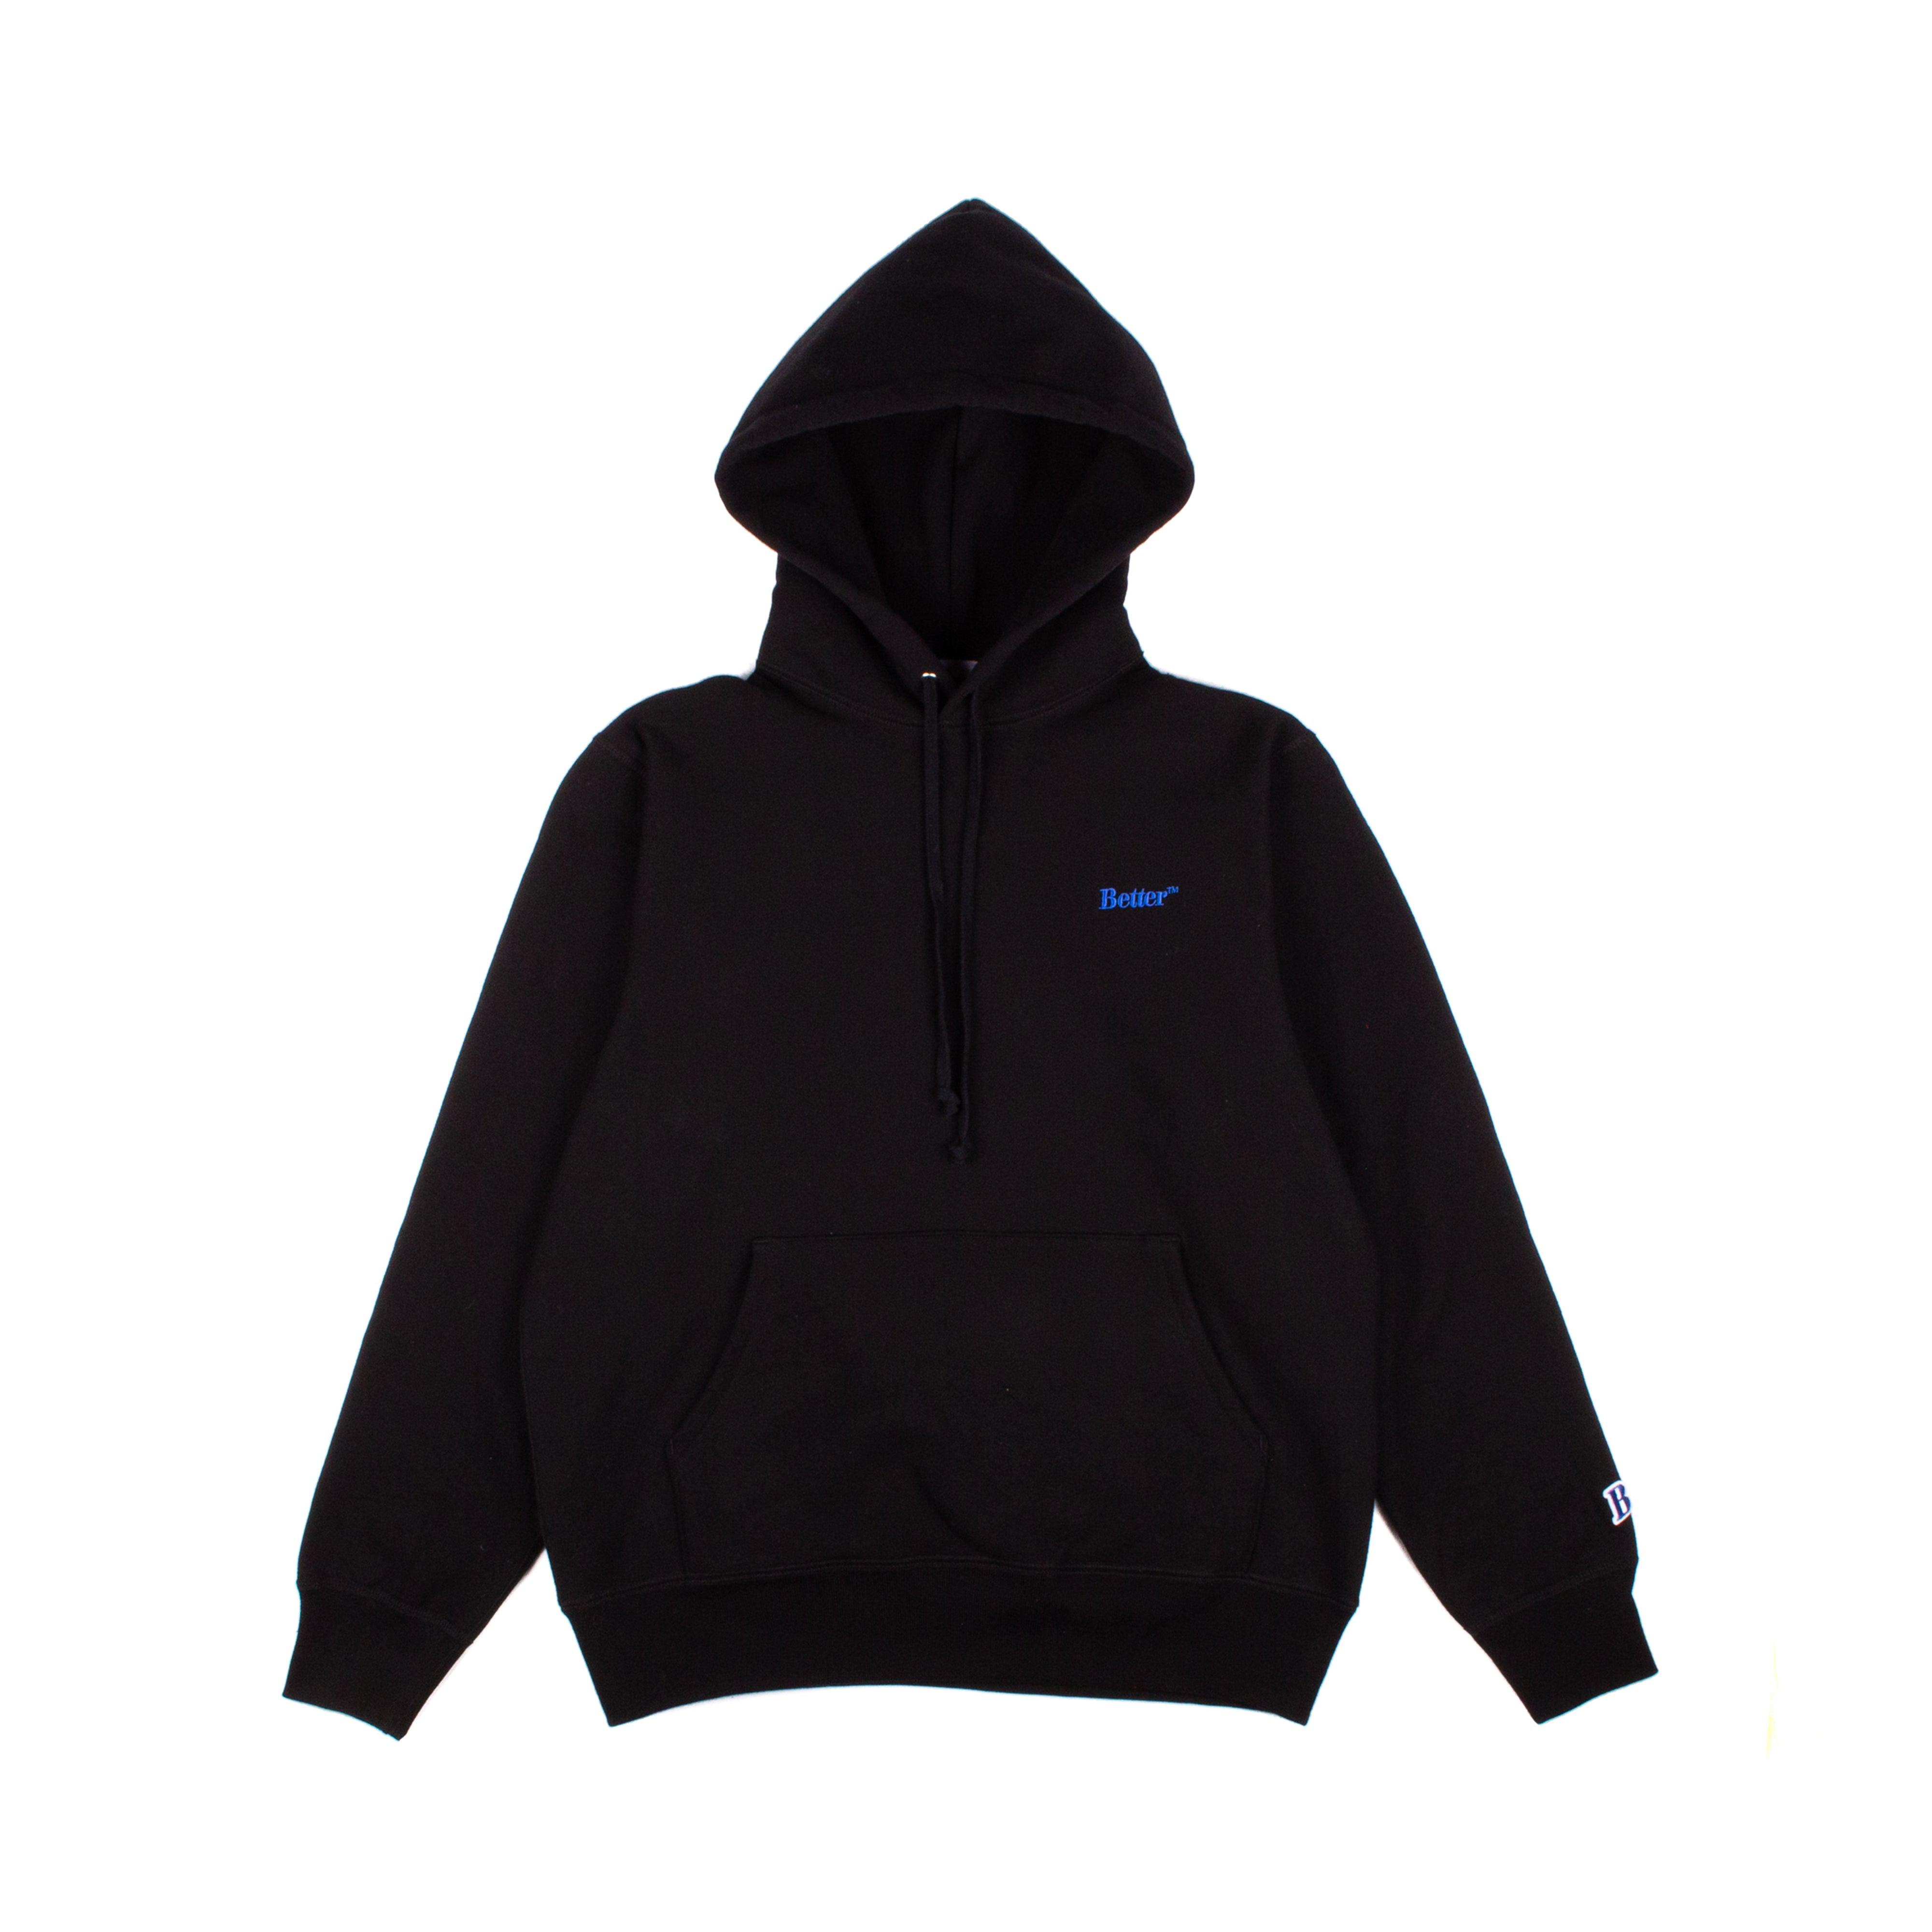 Better™ Gift Shop Logo Hoodie (Black) by BETTER GIFT SHOP